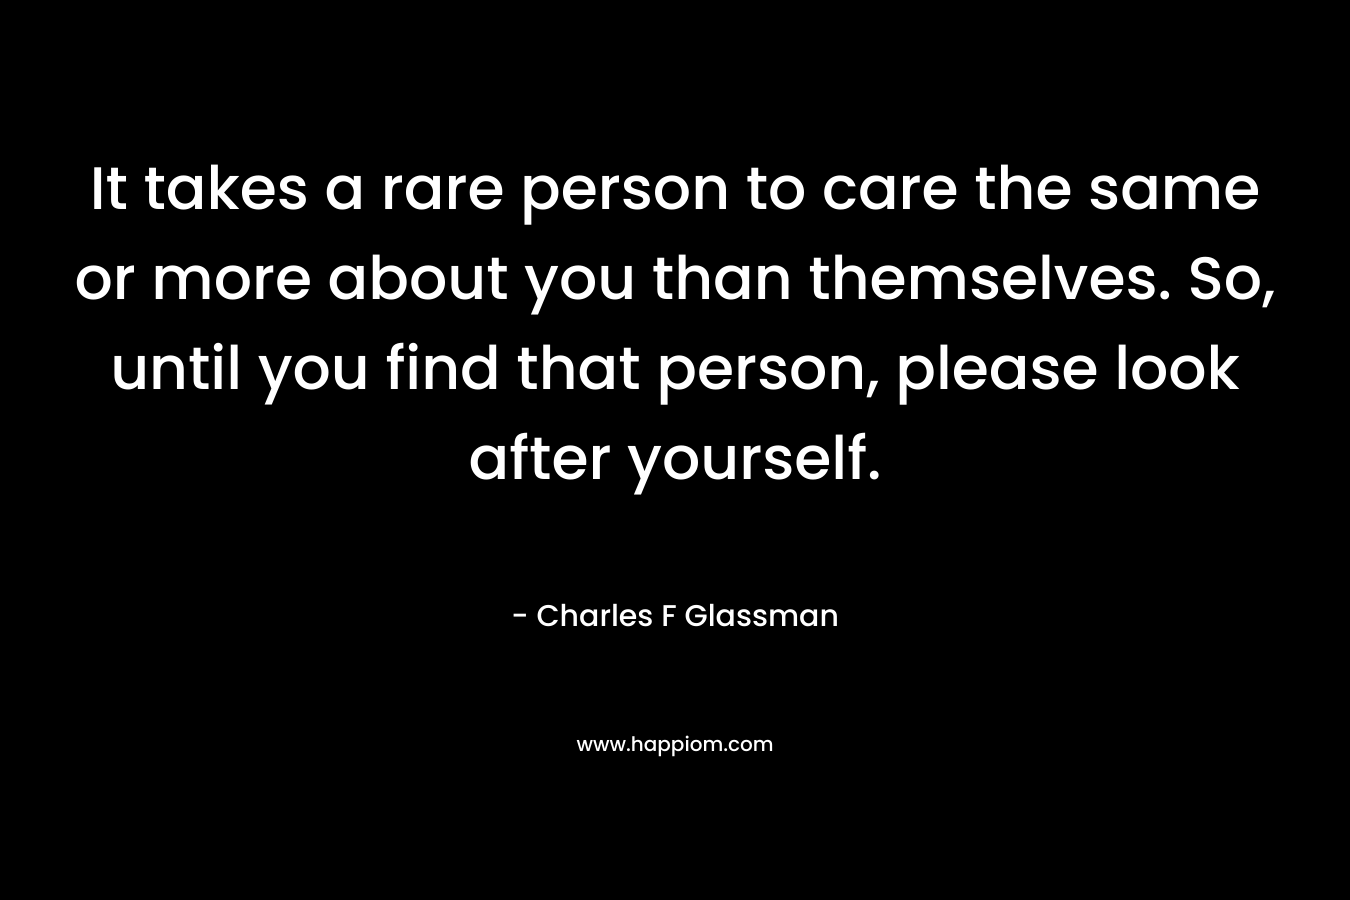 It takes a rare person to care the same or more about you than themselves. So, until you find that person, please look after yourself.